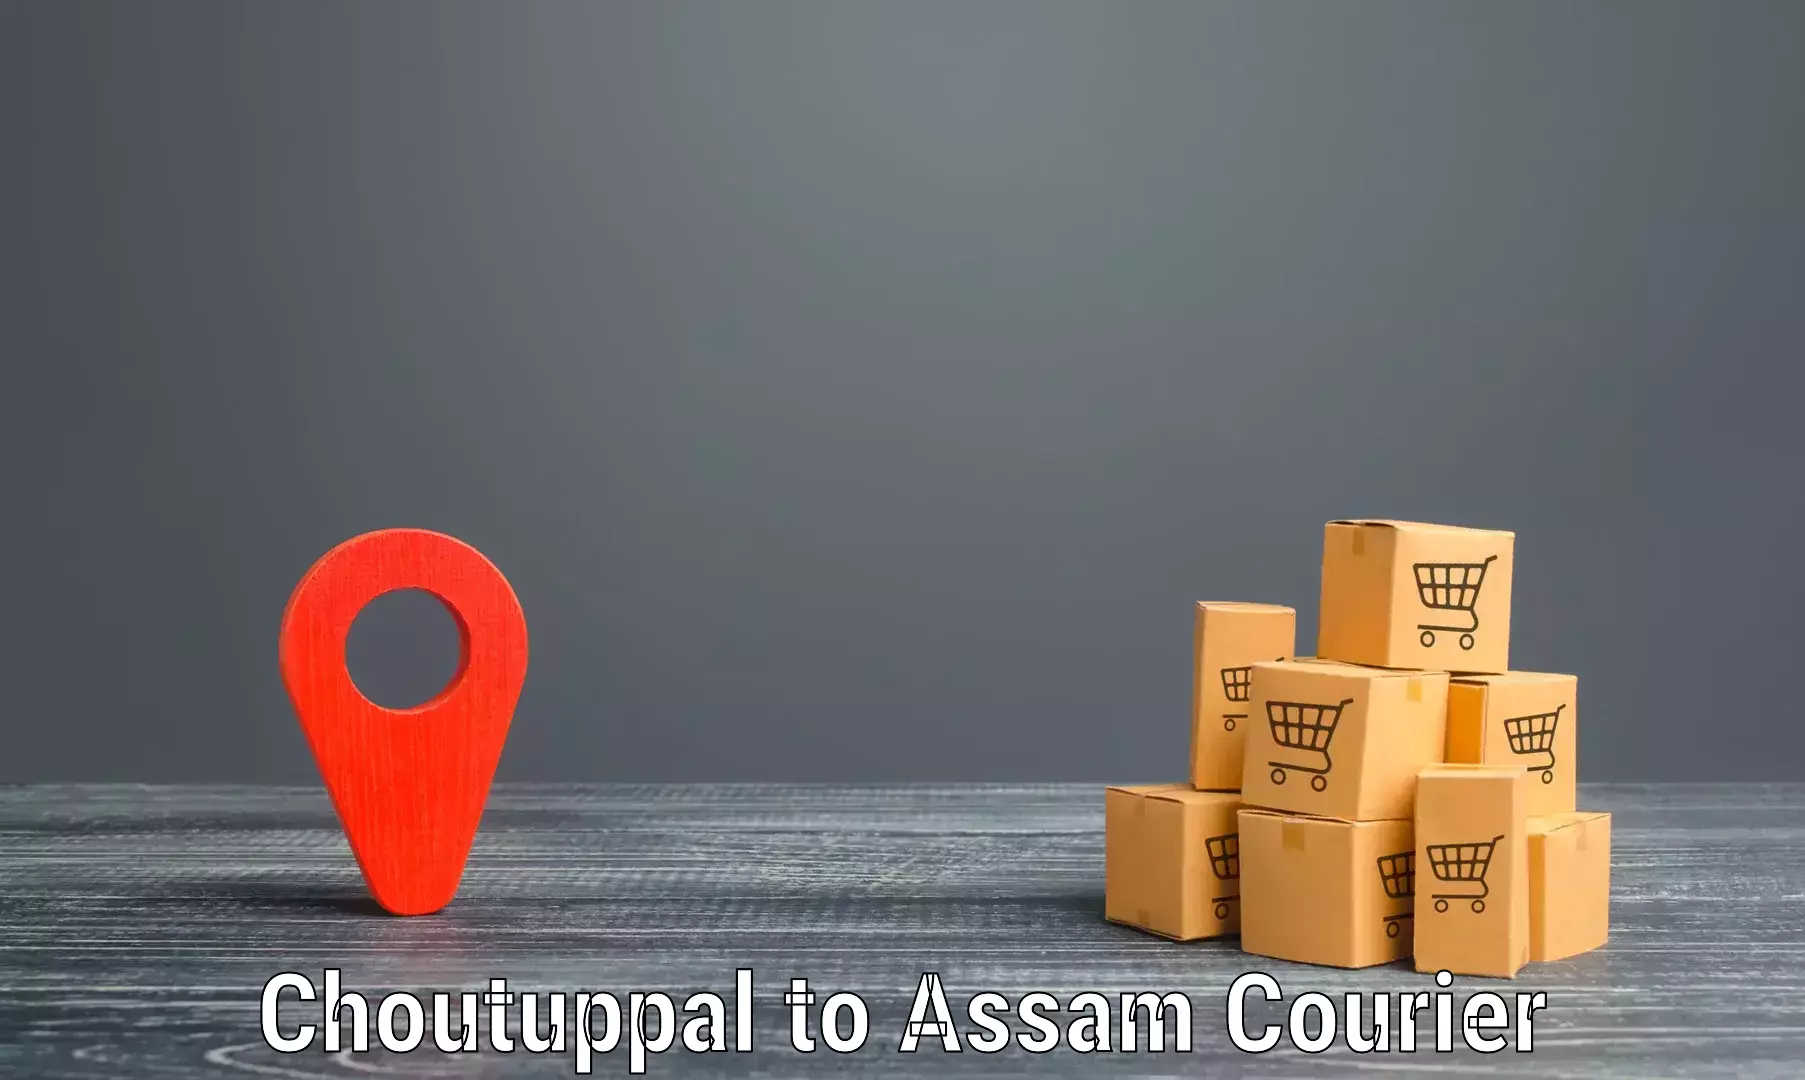 Bulk courier orders in Choutuppal to Margherita